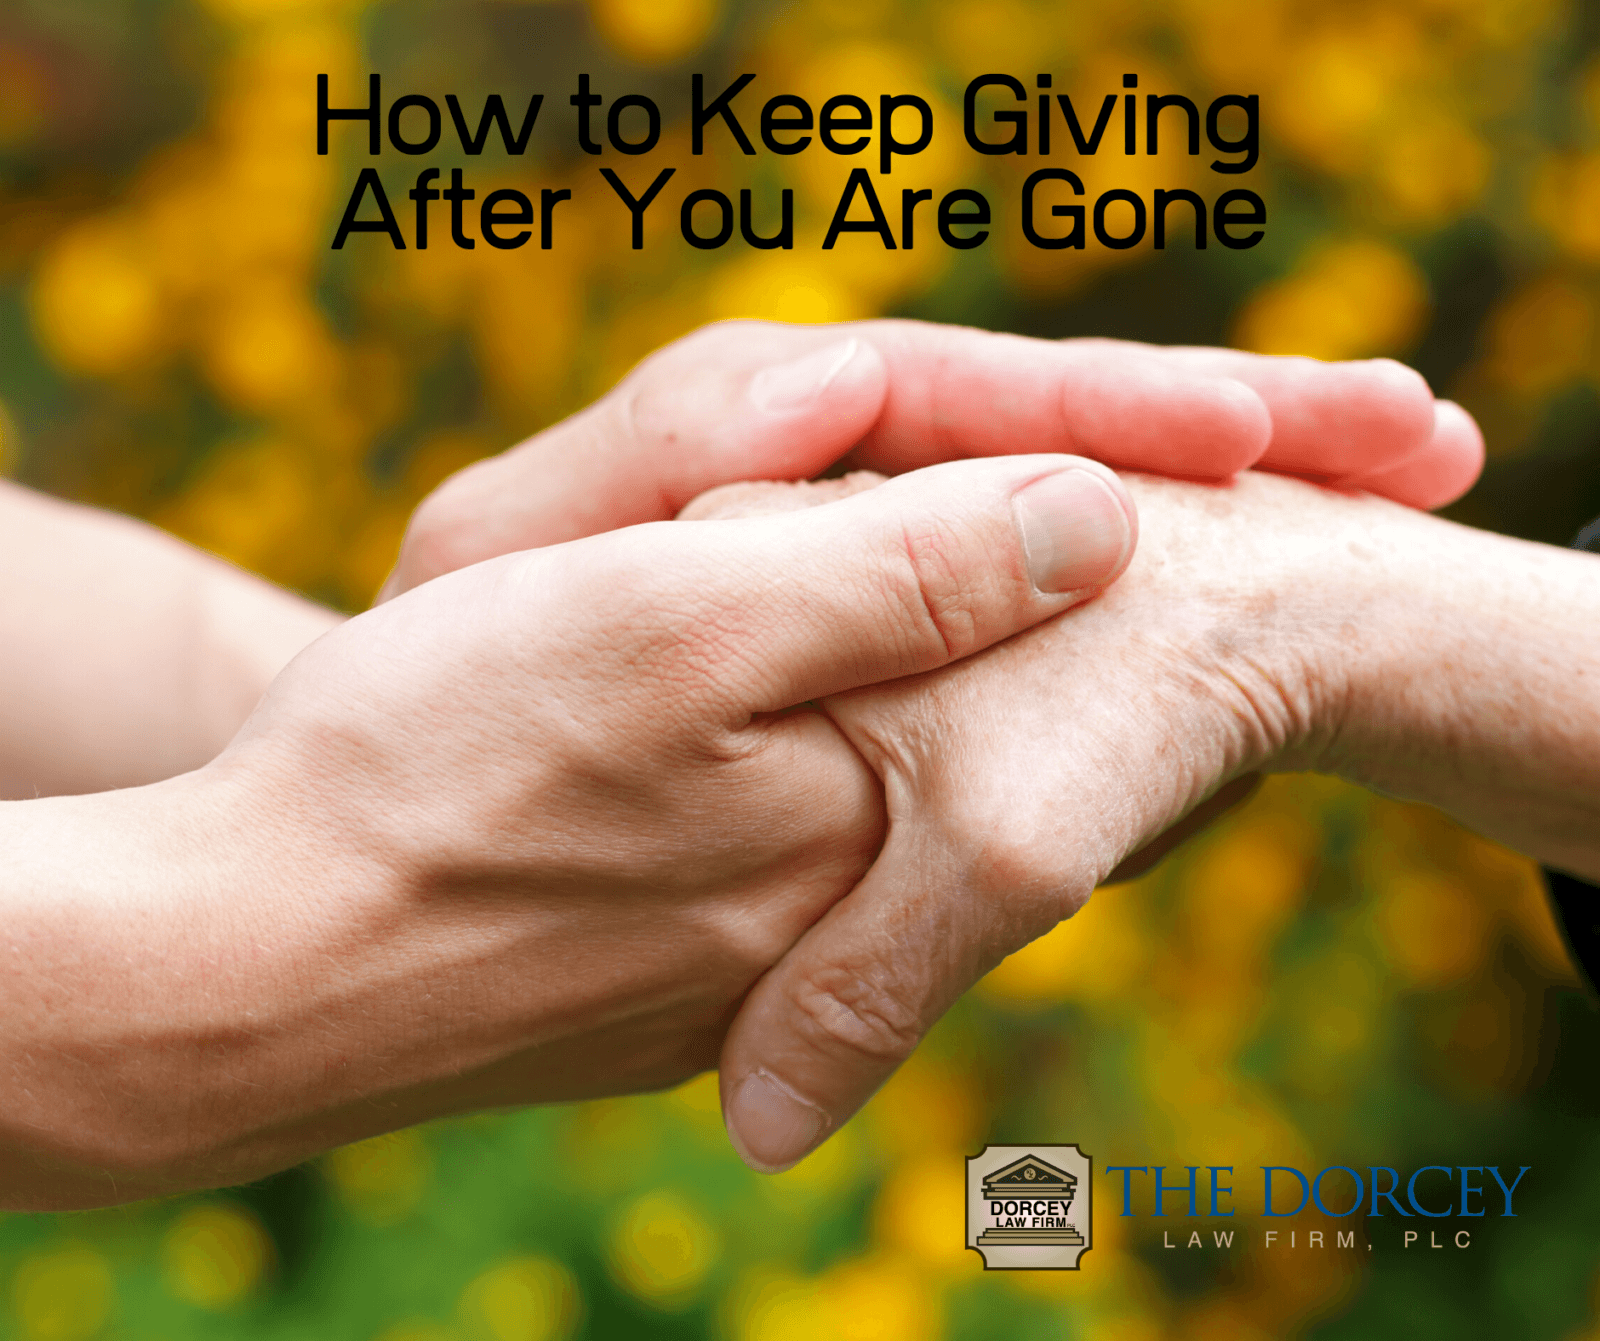 How to Keep Giving After You Are Gone